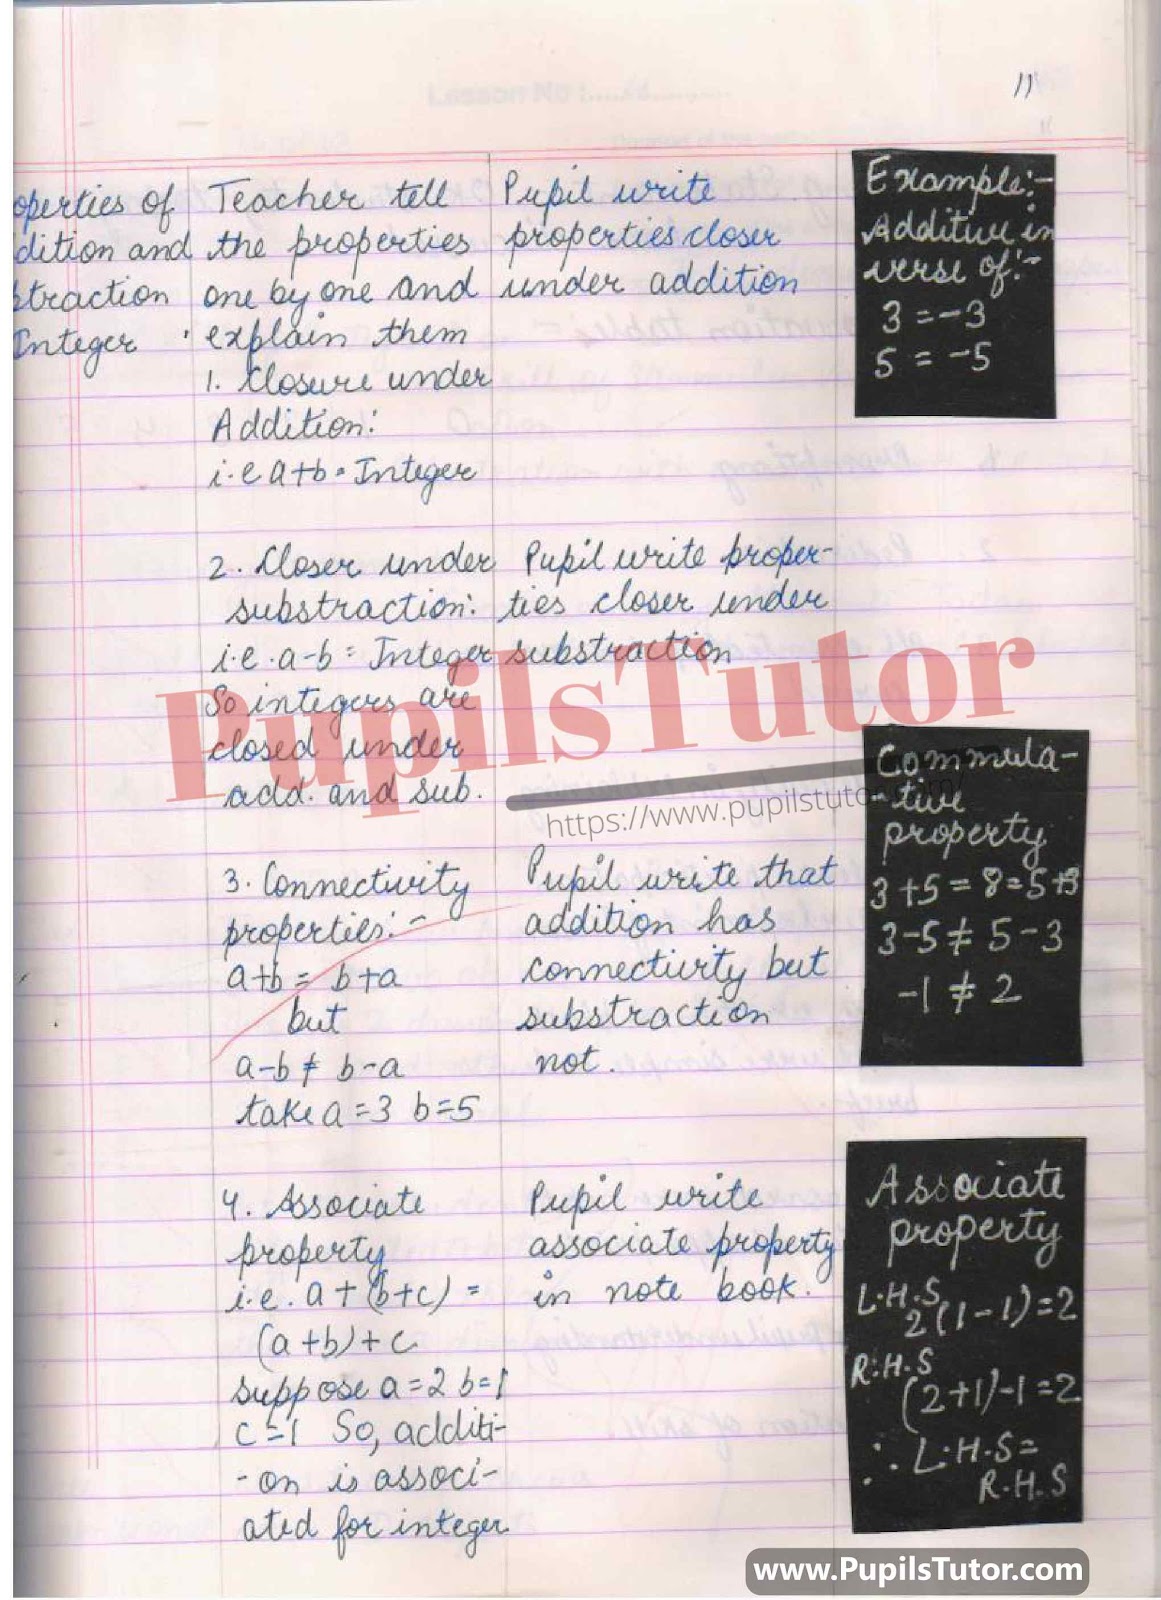 Class/Grade 8 Mathematics Lesson Plan On Properties Of Integer For CBSE NCERT KVS School And University College Teachers – (Page And Image Number 3) – www.pupilstutor.com